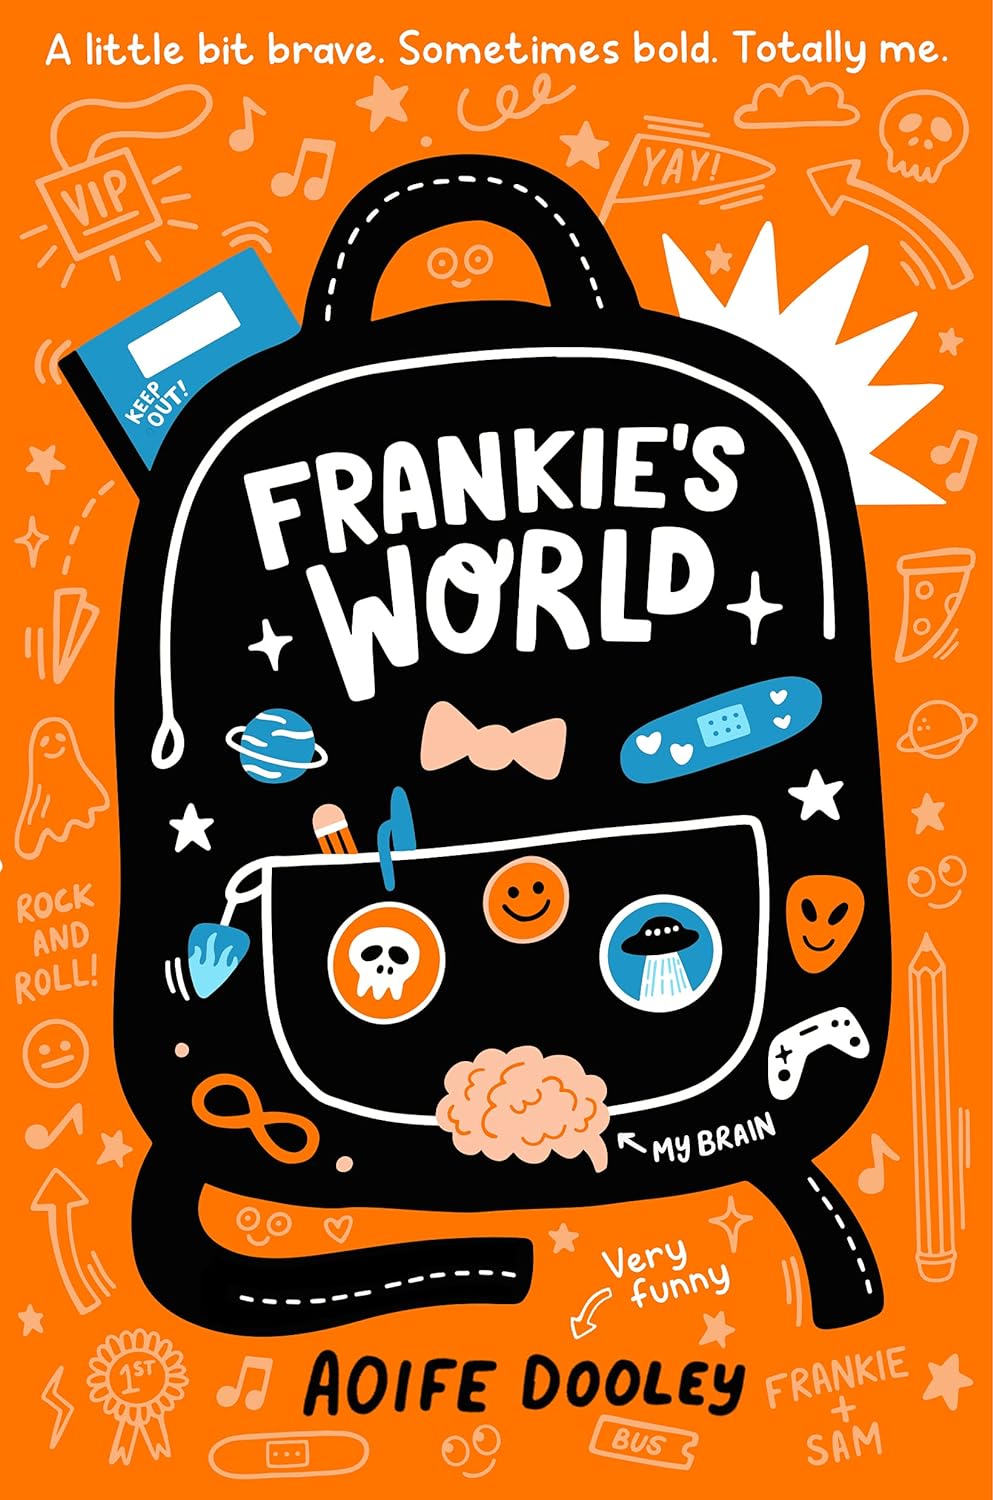 Frankie's World" by Aditie Dooley explores the lives of disabled and neurodiverse characters in a creative and thought-provoking manner.